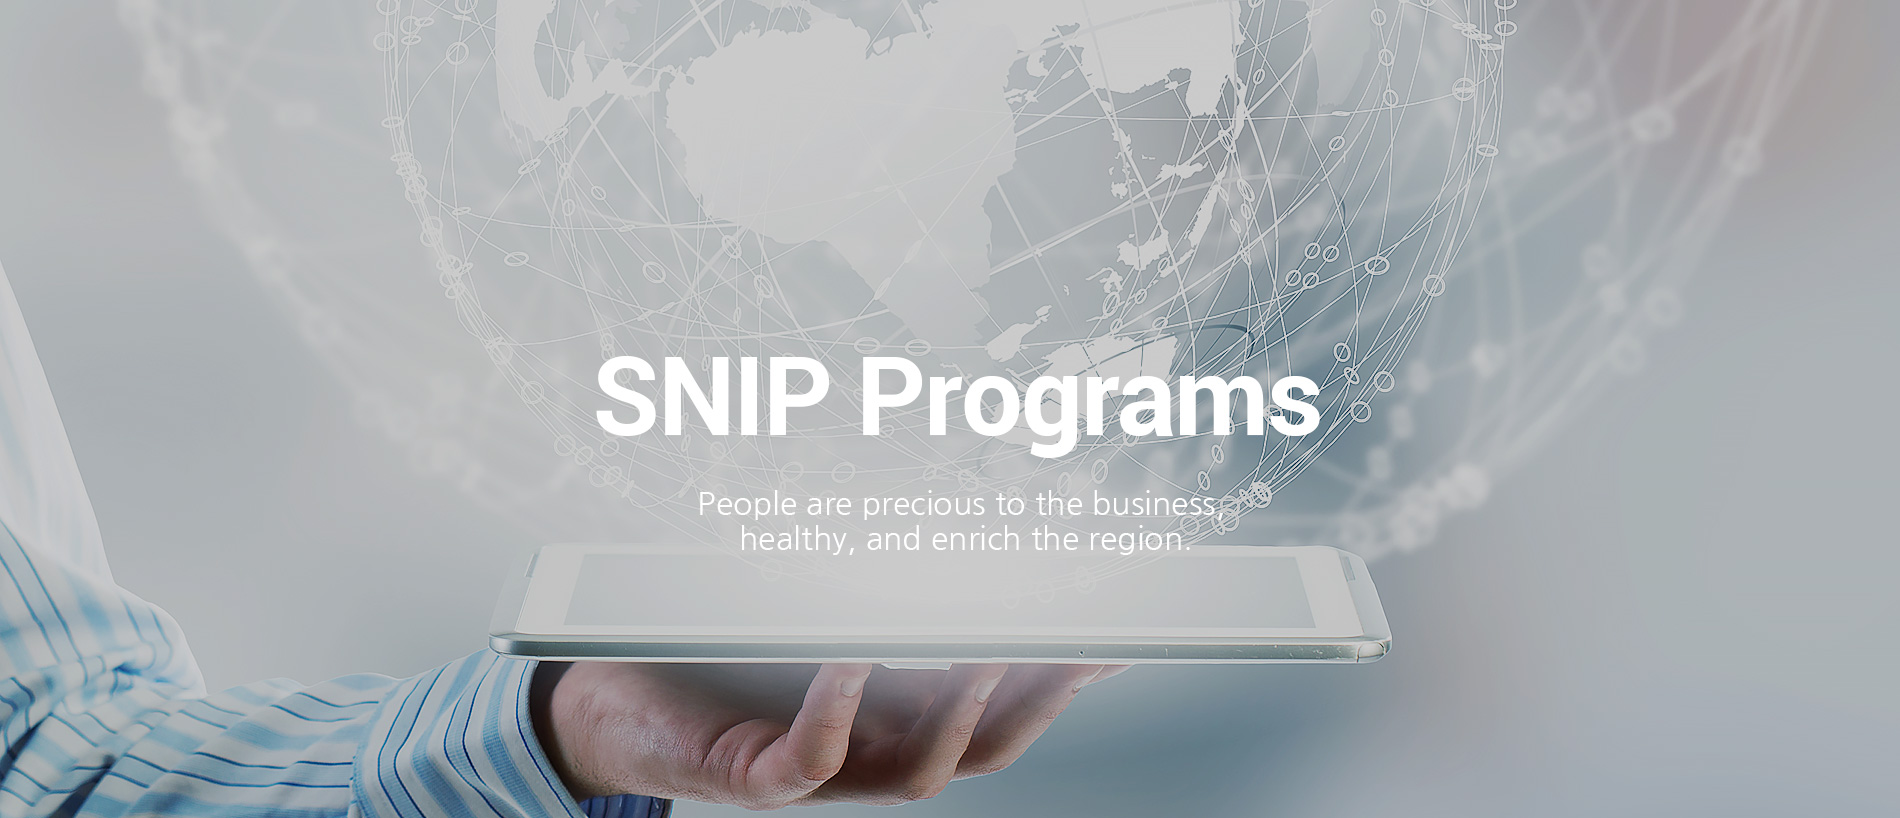 SNIP Programs People are precious to the business, healthy, and enrich the region.